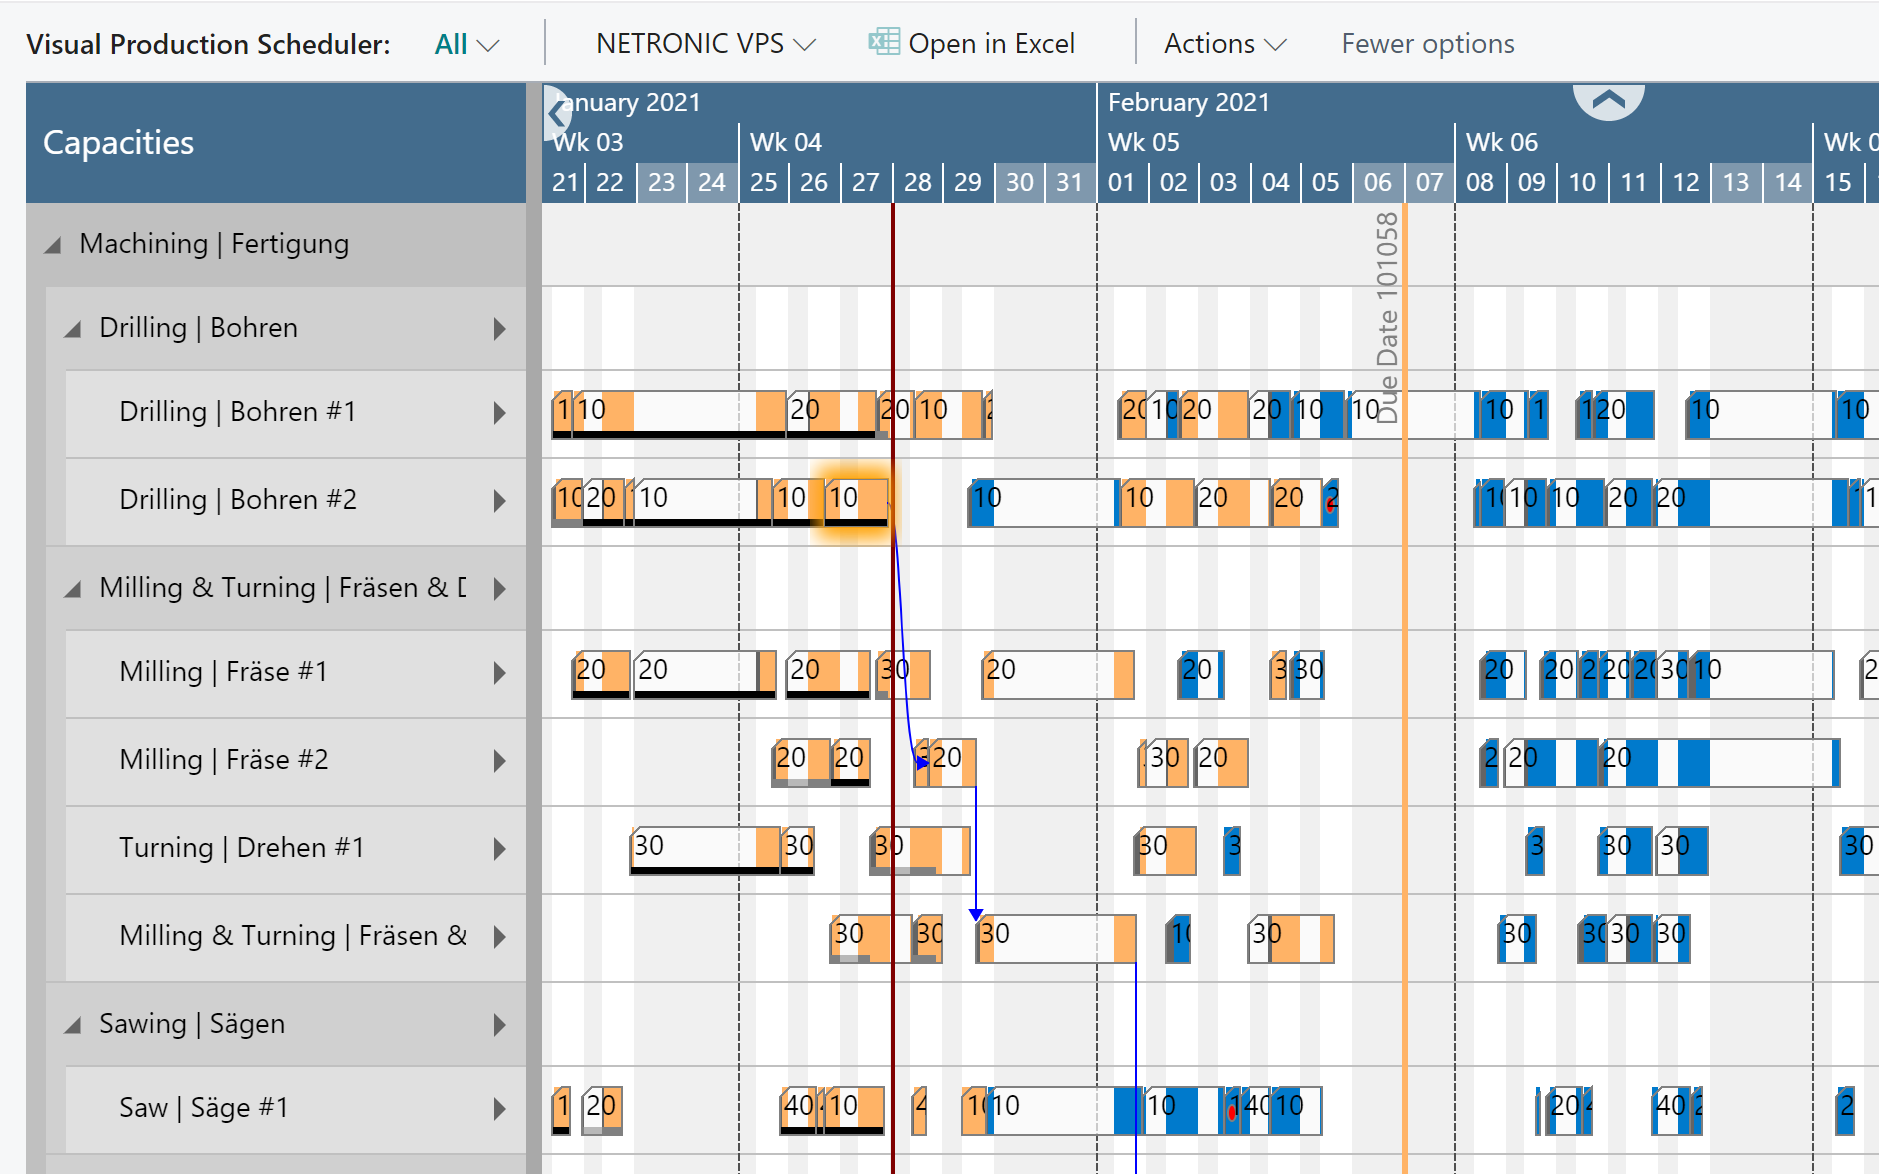 Visual Production Scheduler for Microsoft Dynamics 365 Business Central - Resource View